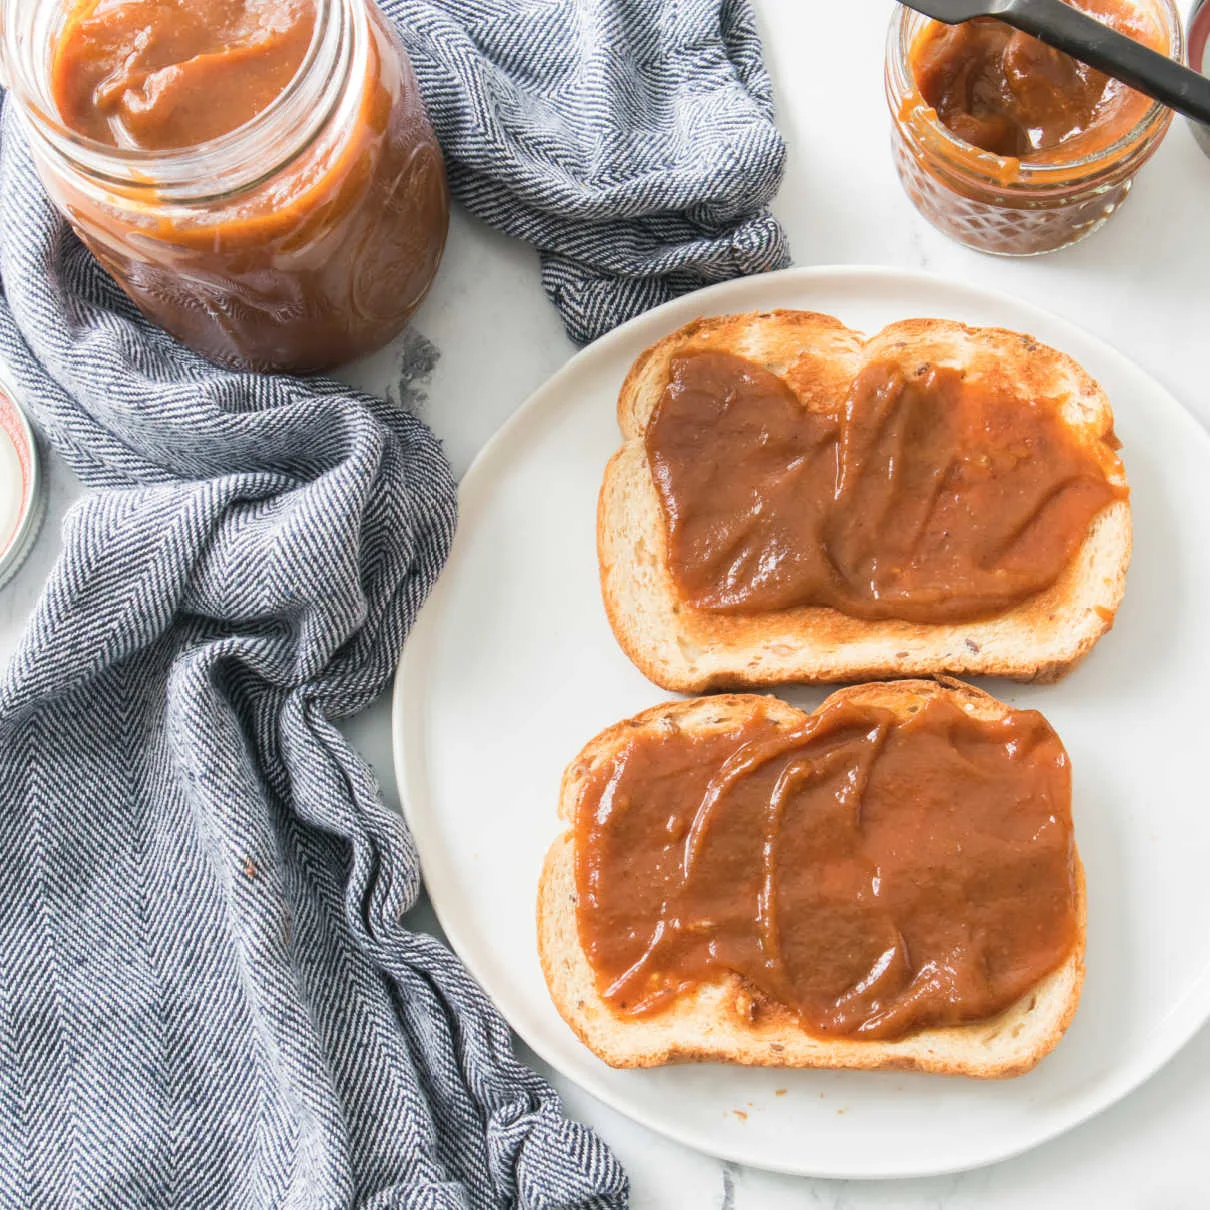 pumpkin butter spread over two slices of toast next to jar of homemade pumpkin butter.